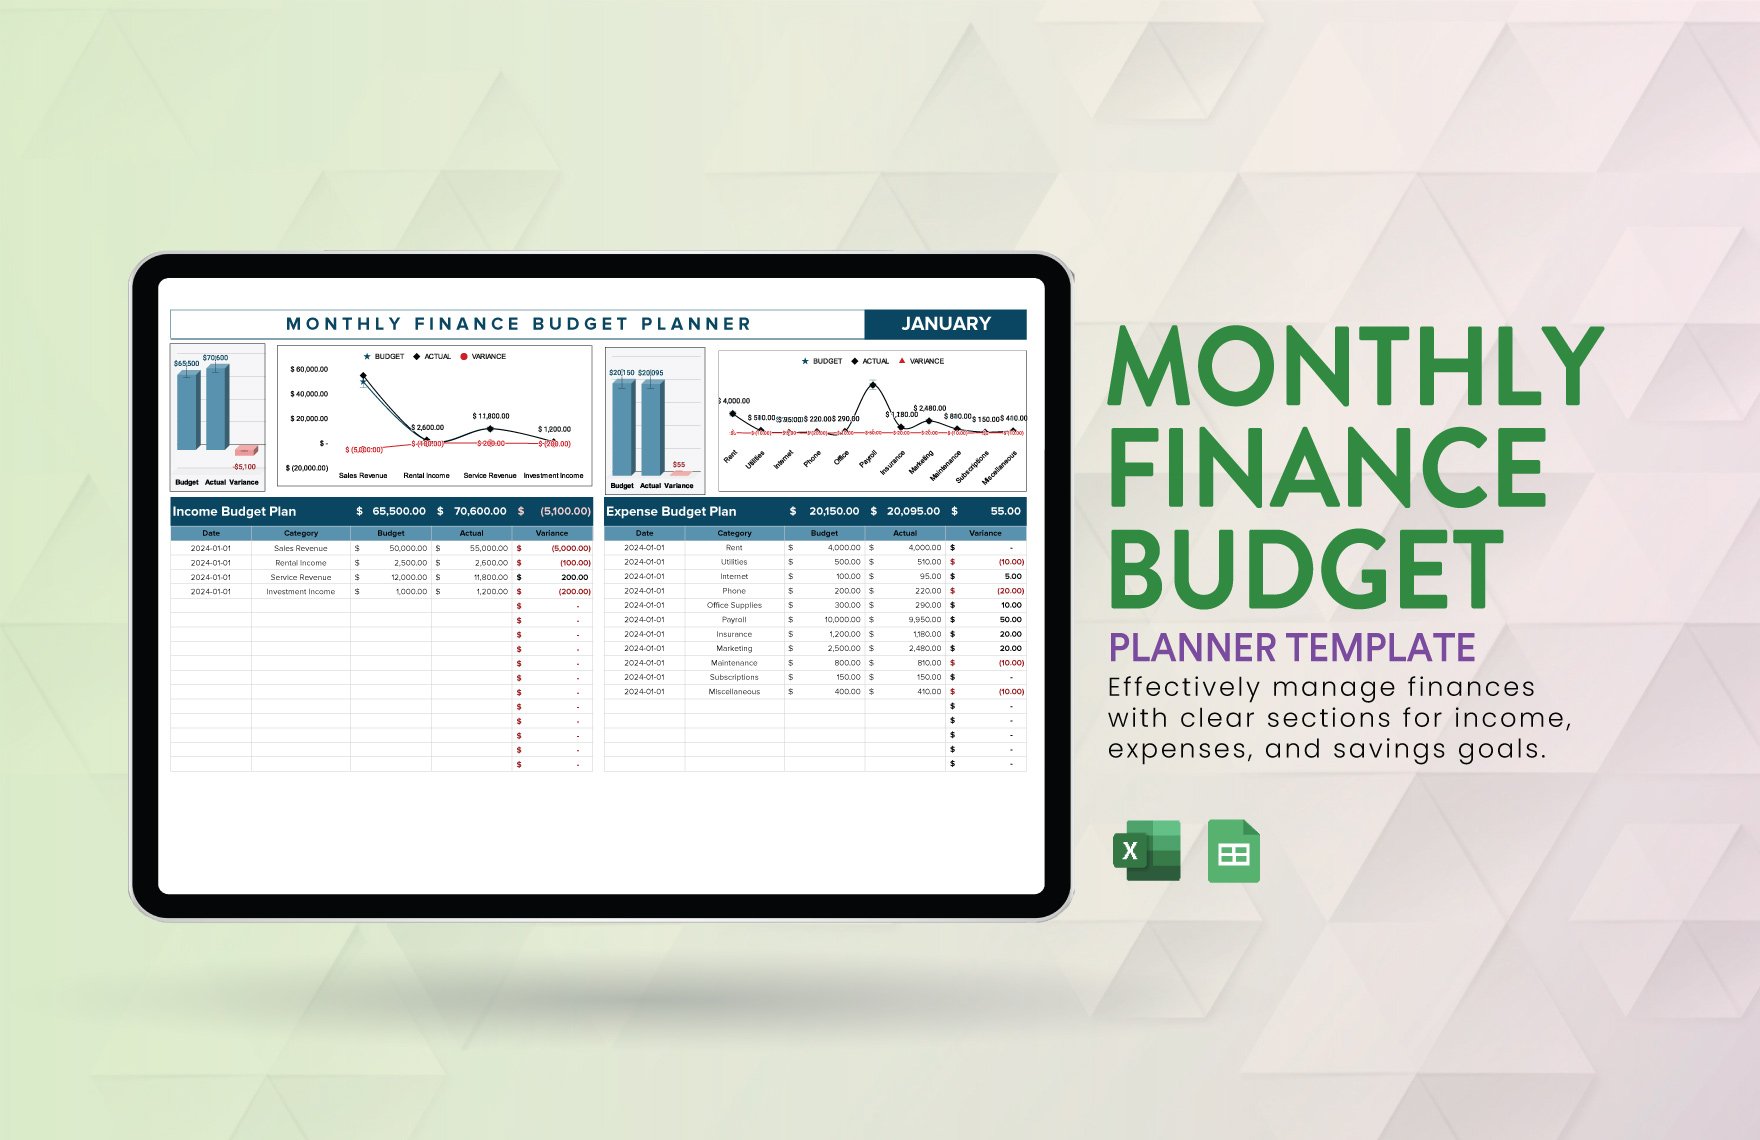 Monthly Finance Budget Planner Template in Excel, Google Sheets